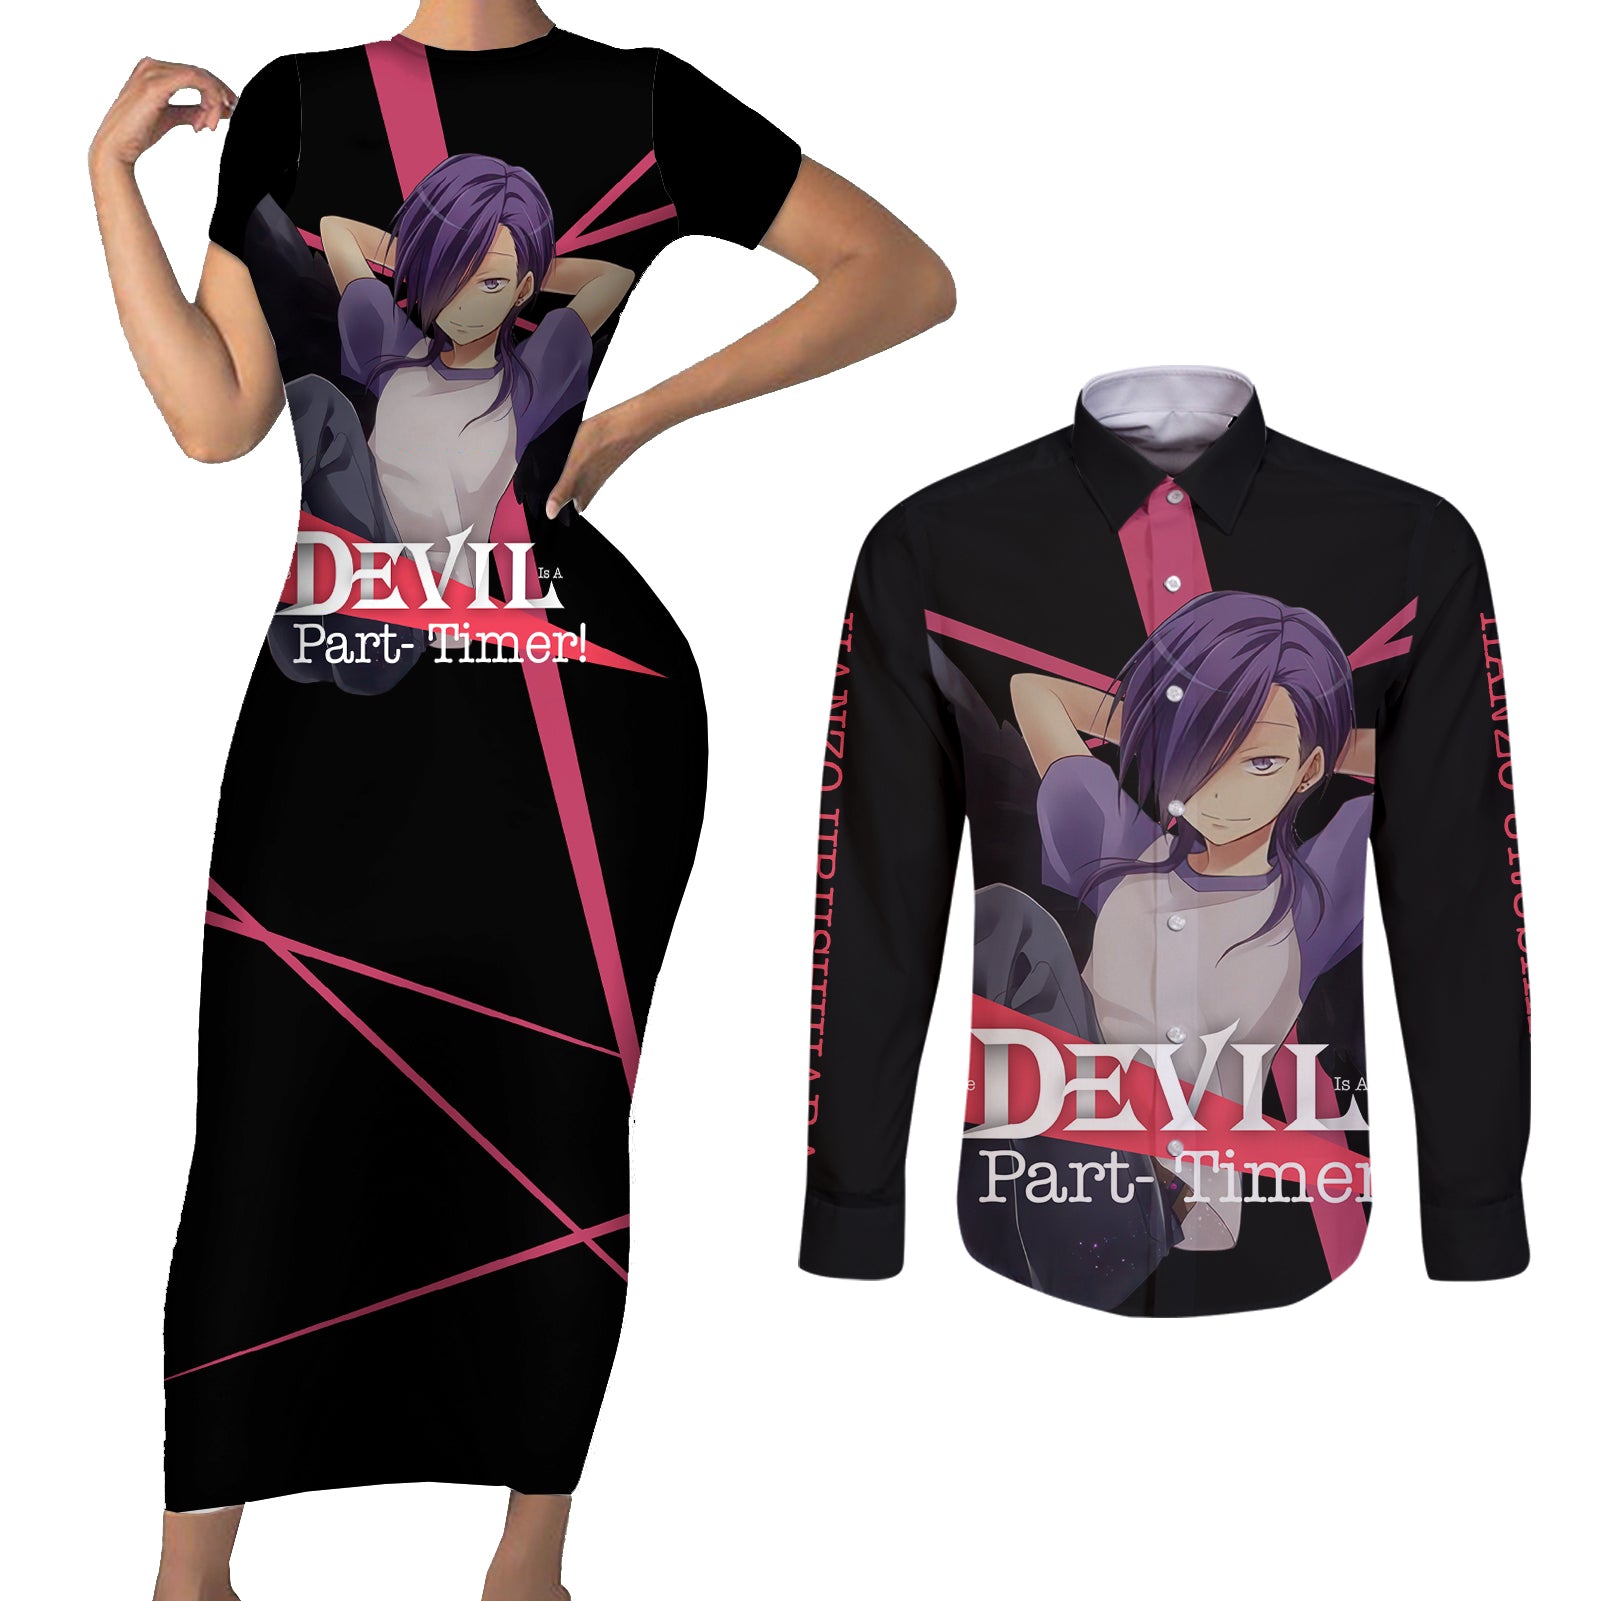 Hanzo Urushihara The Devil Part Timer Couples Matching Short Sleeve Bodycon Dress and Long Sleeve Button Shirt Anime Style